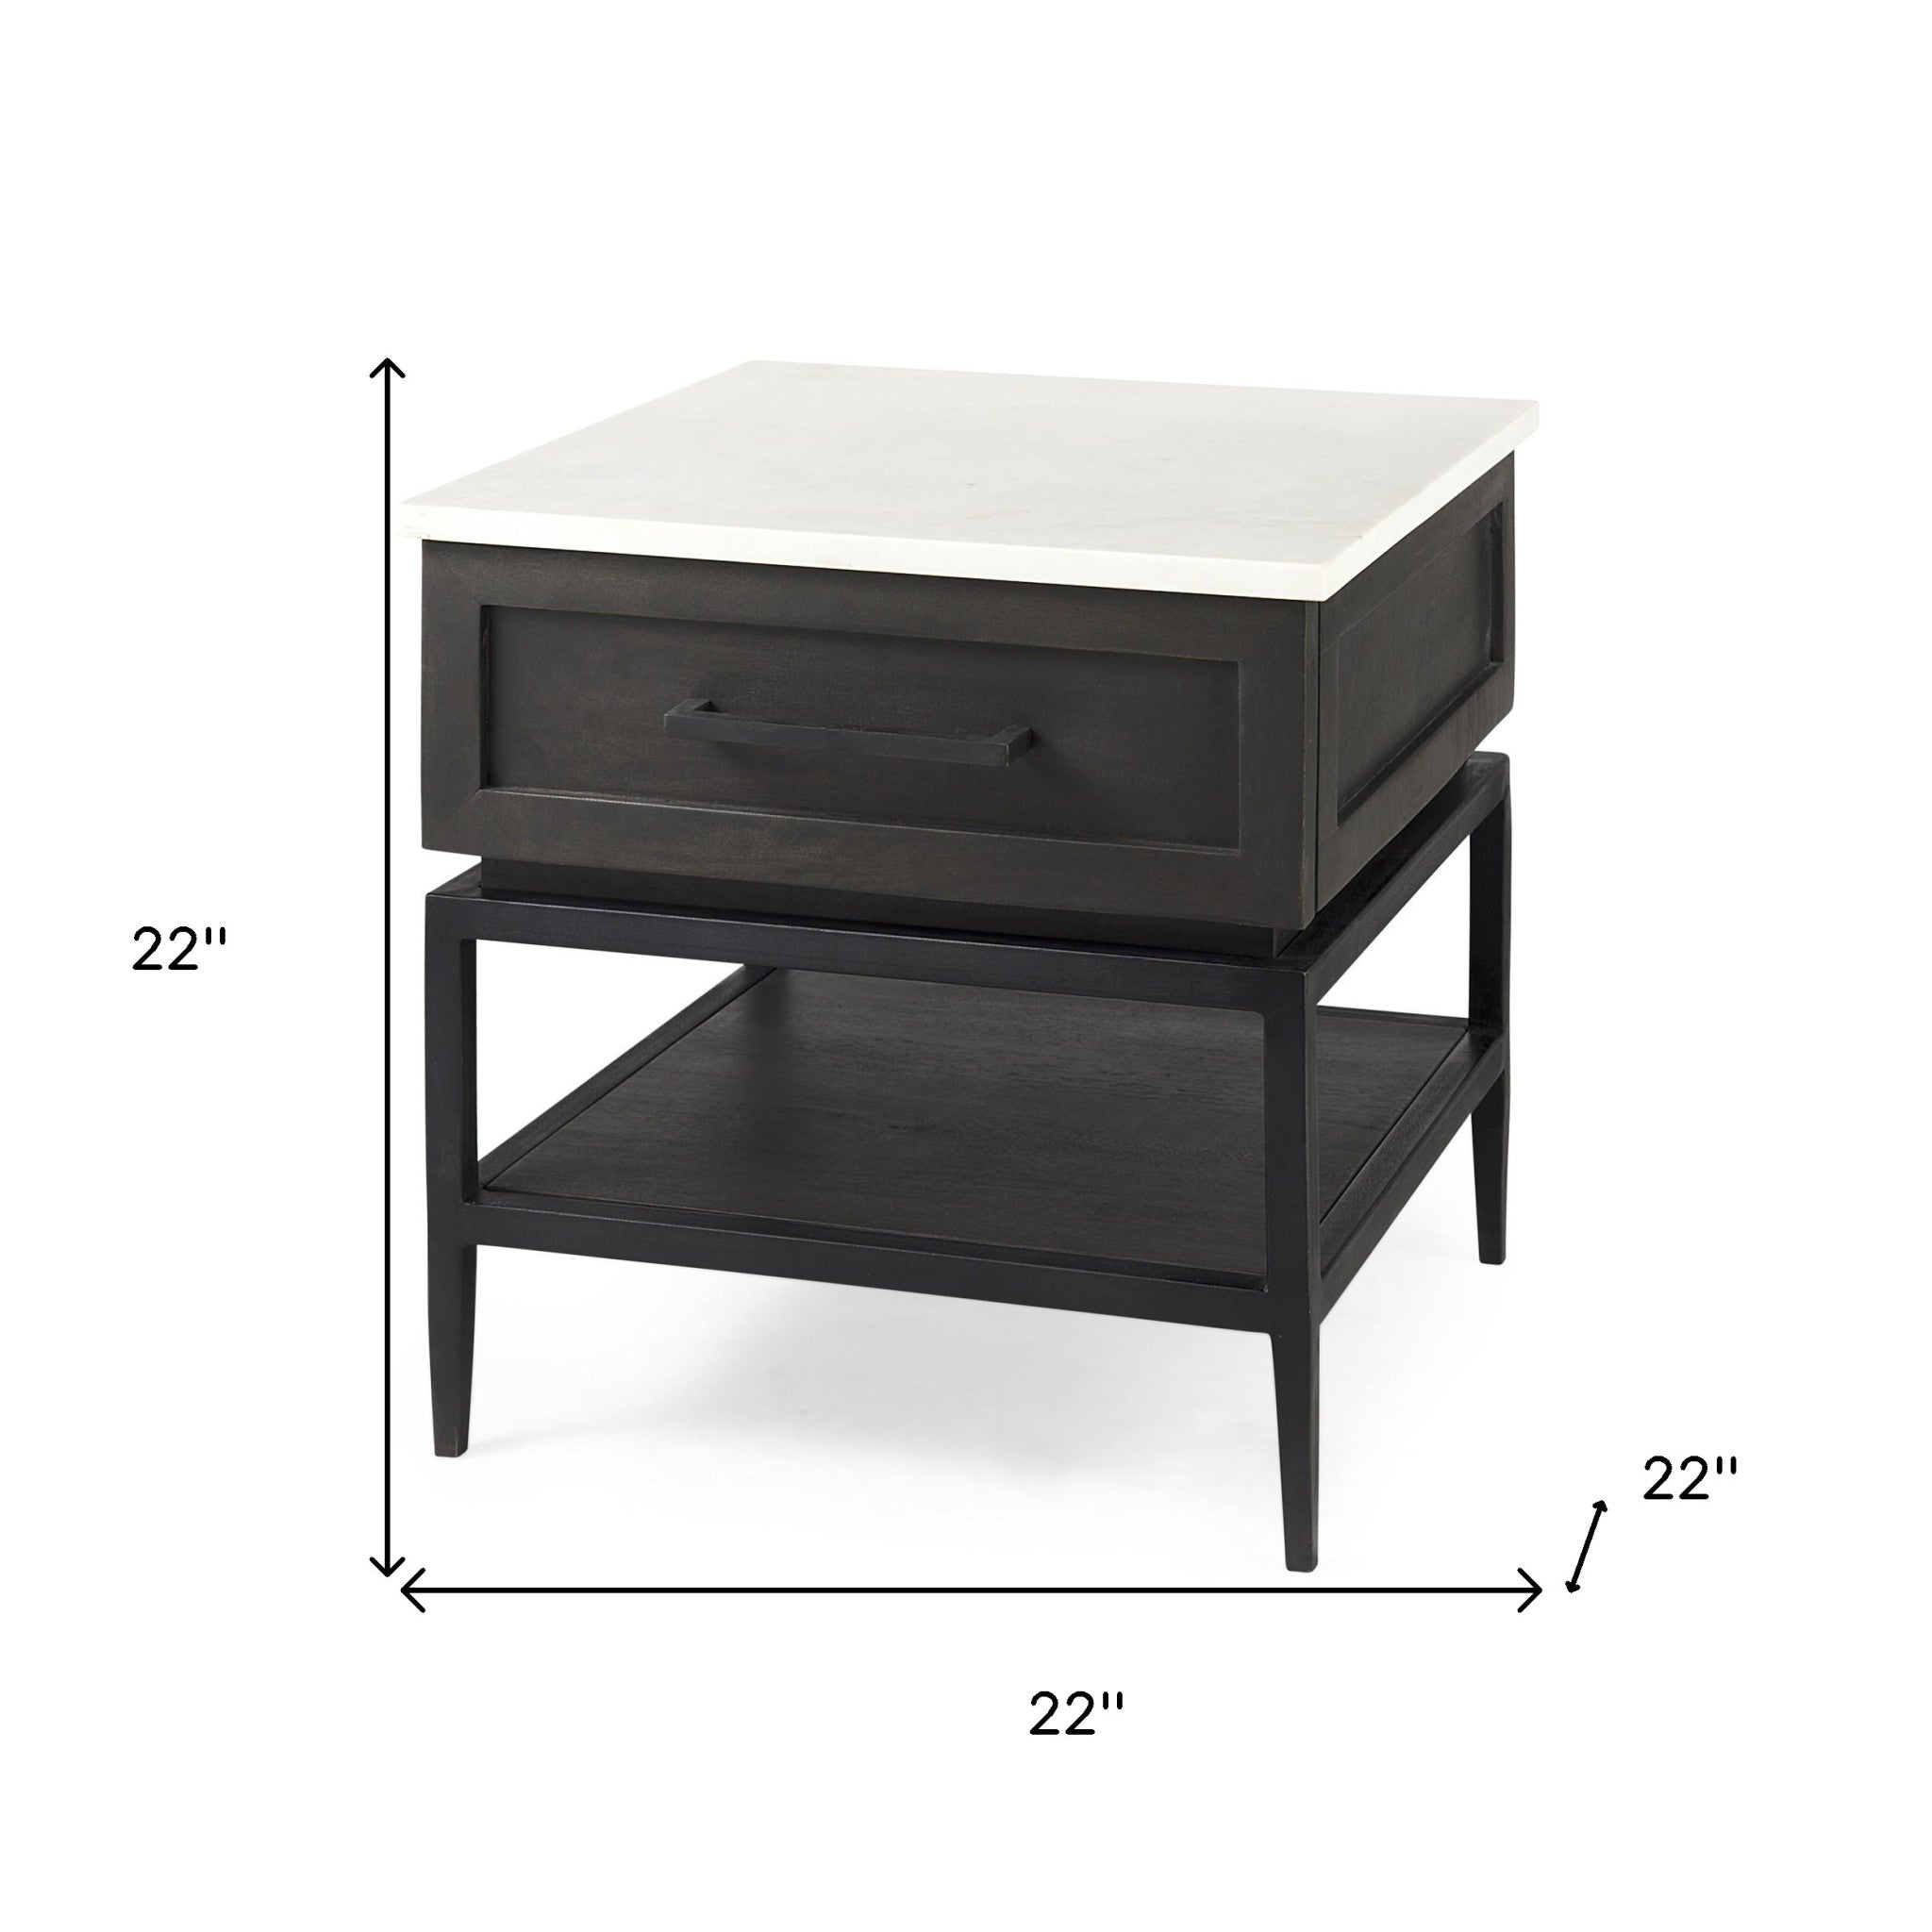 22" Black And White Marble Square End Table